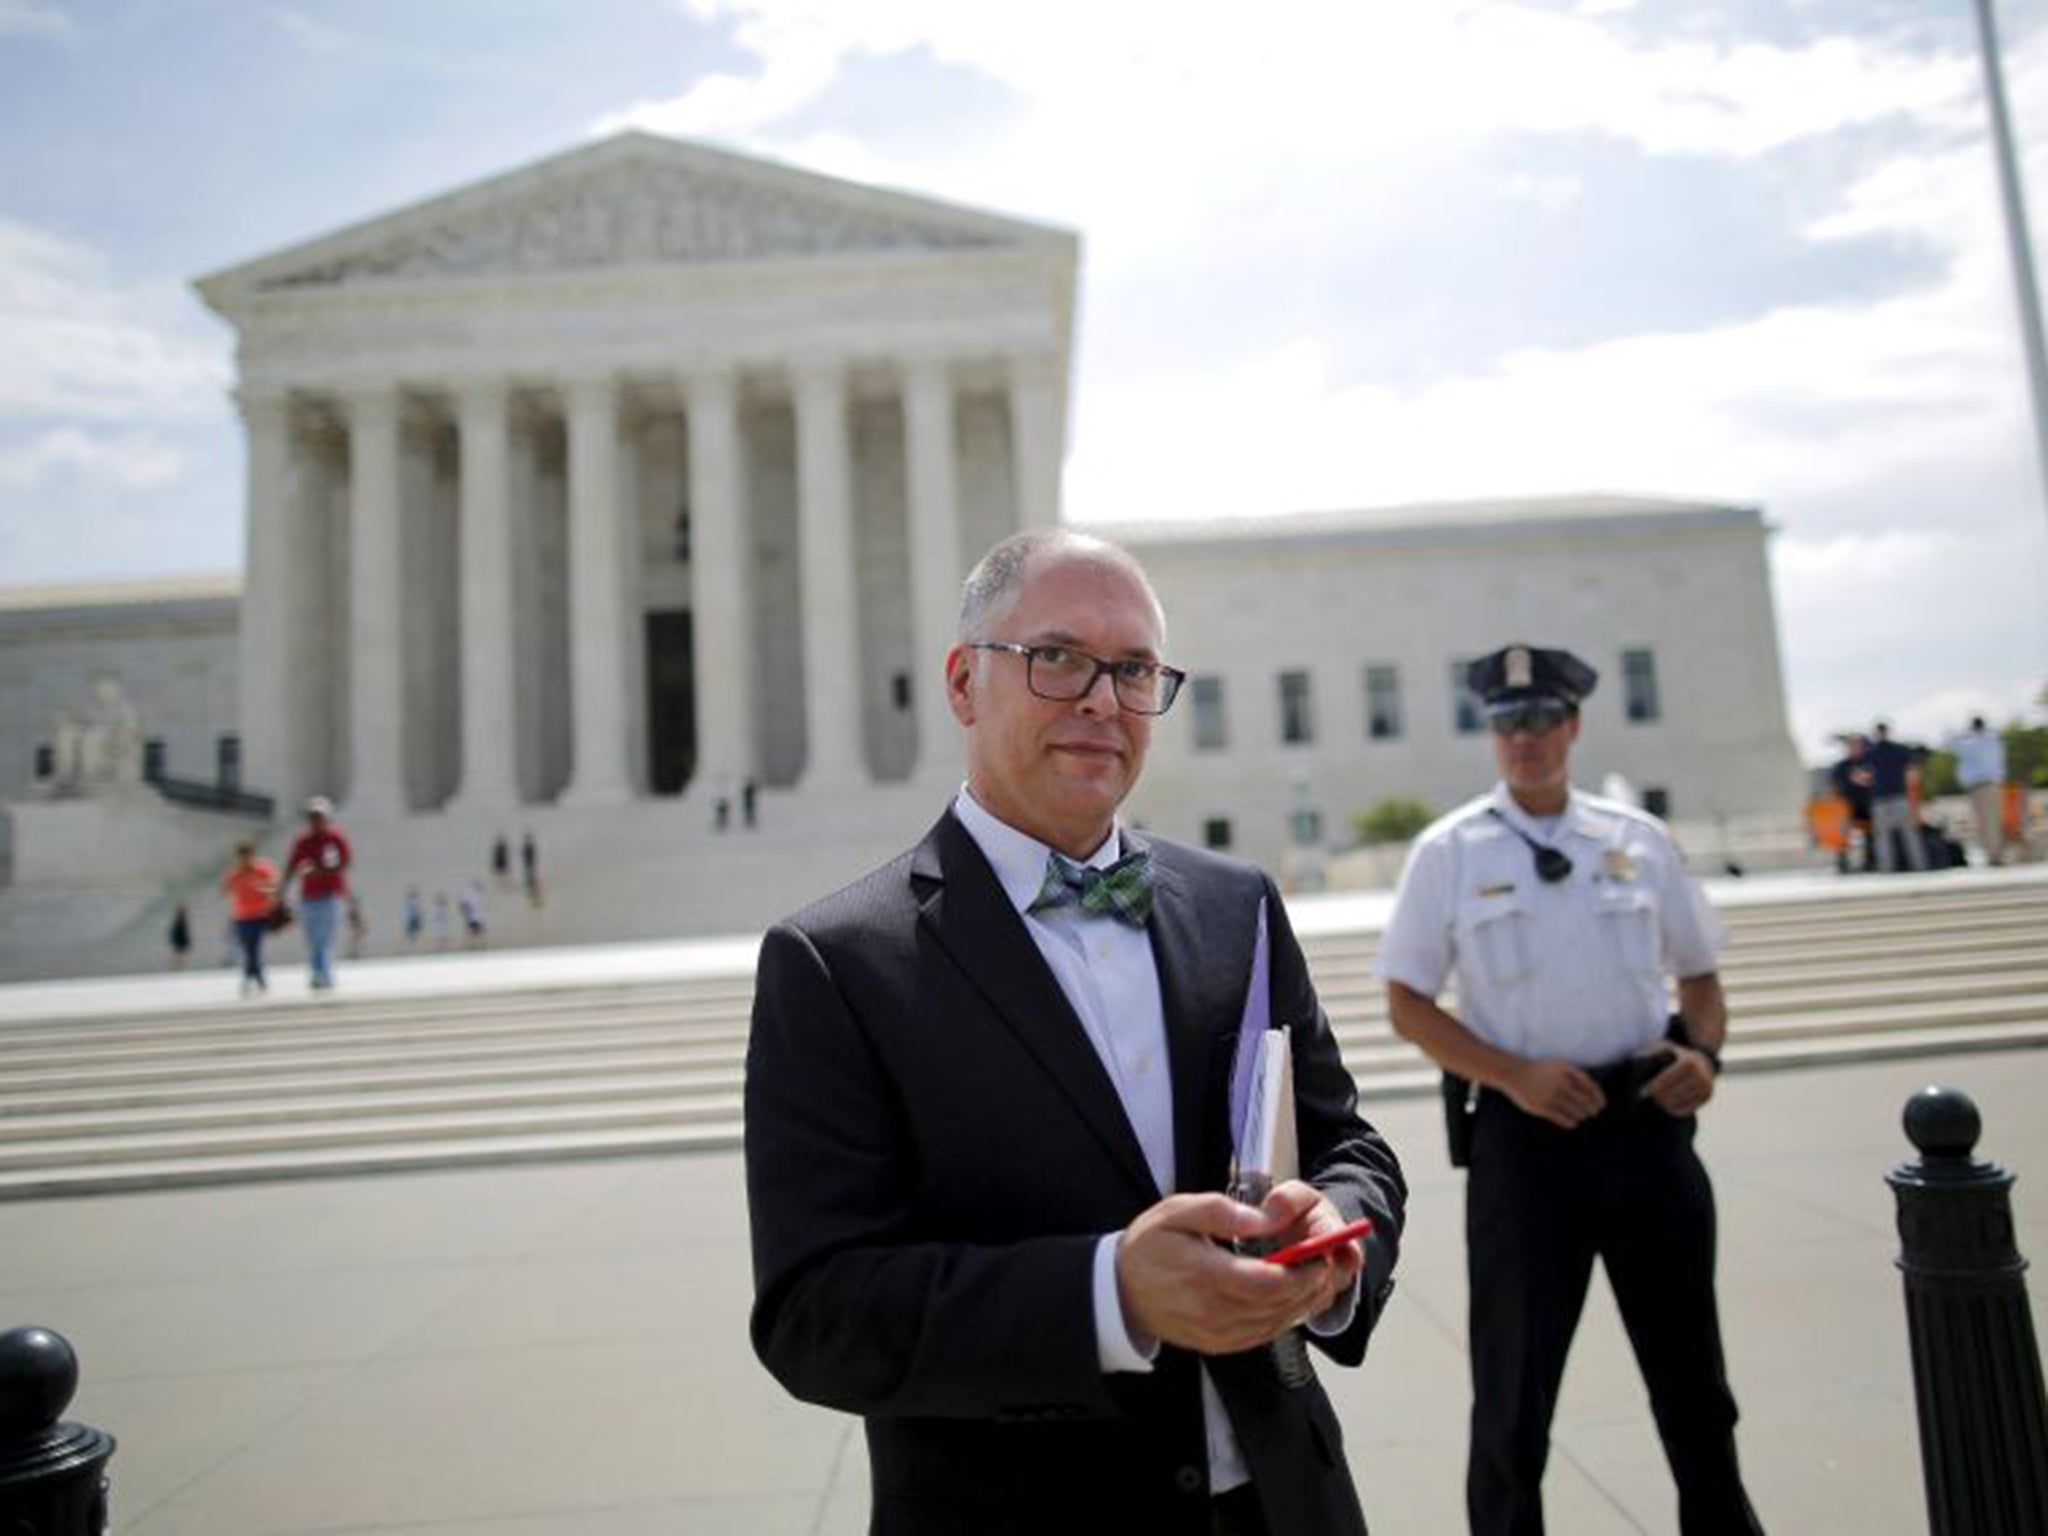 Jim Obergefell’s case will set a precedent on same-sex marriage in America